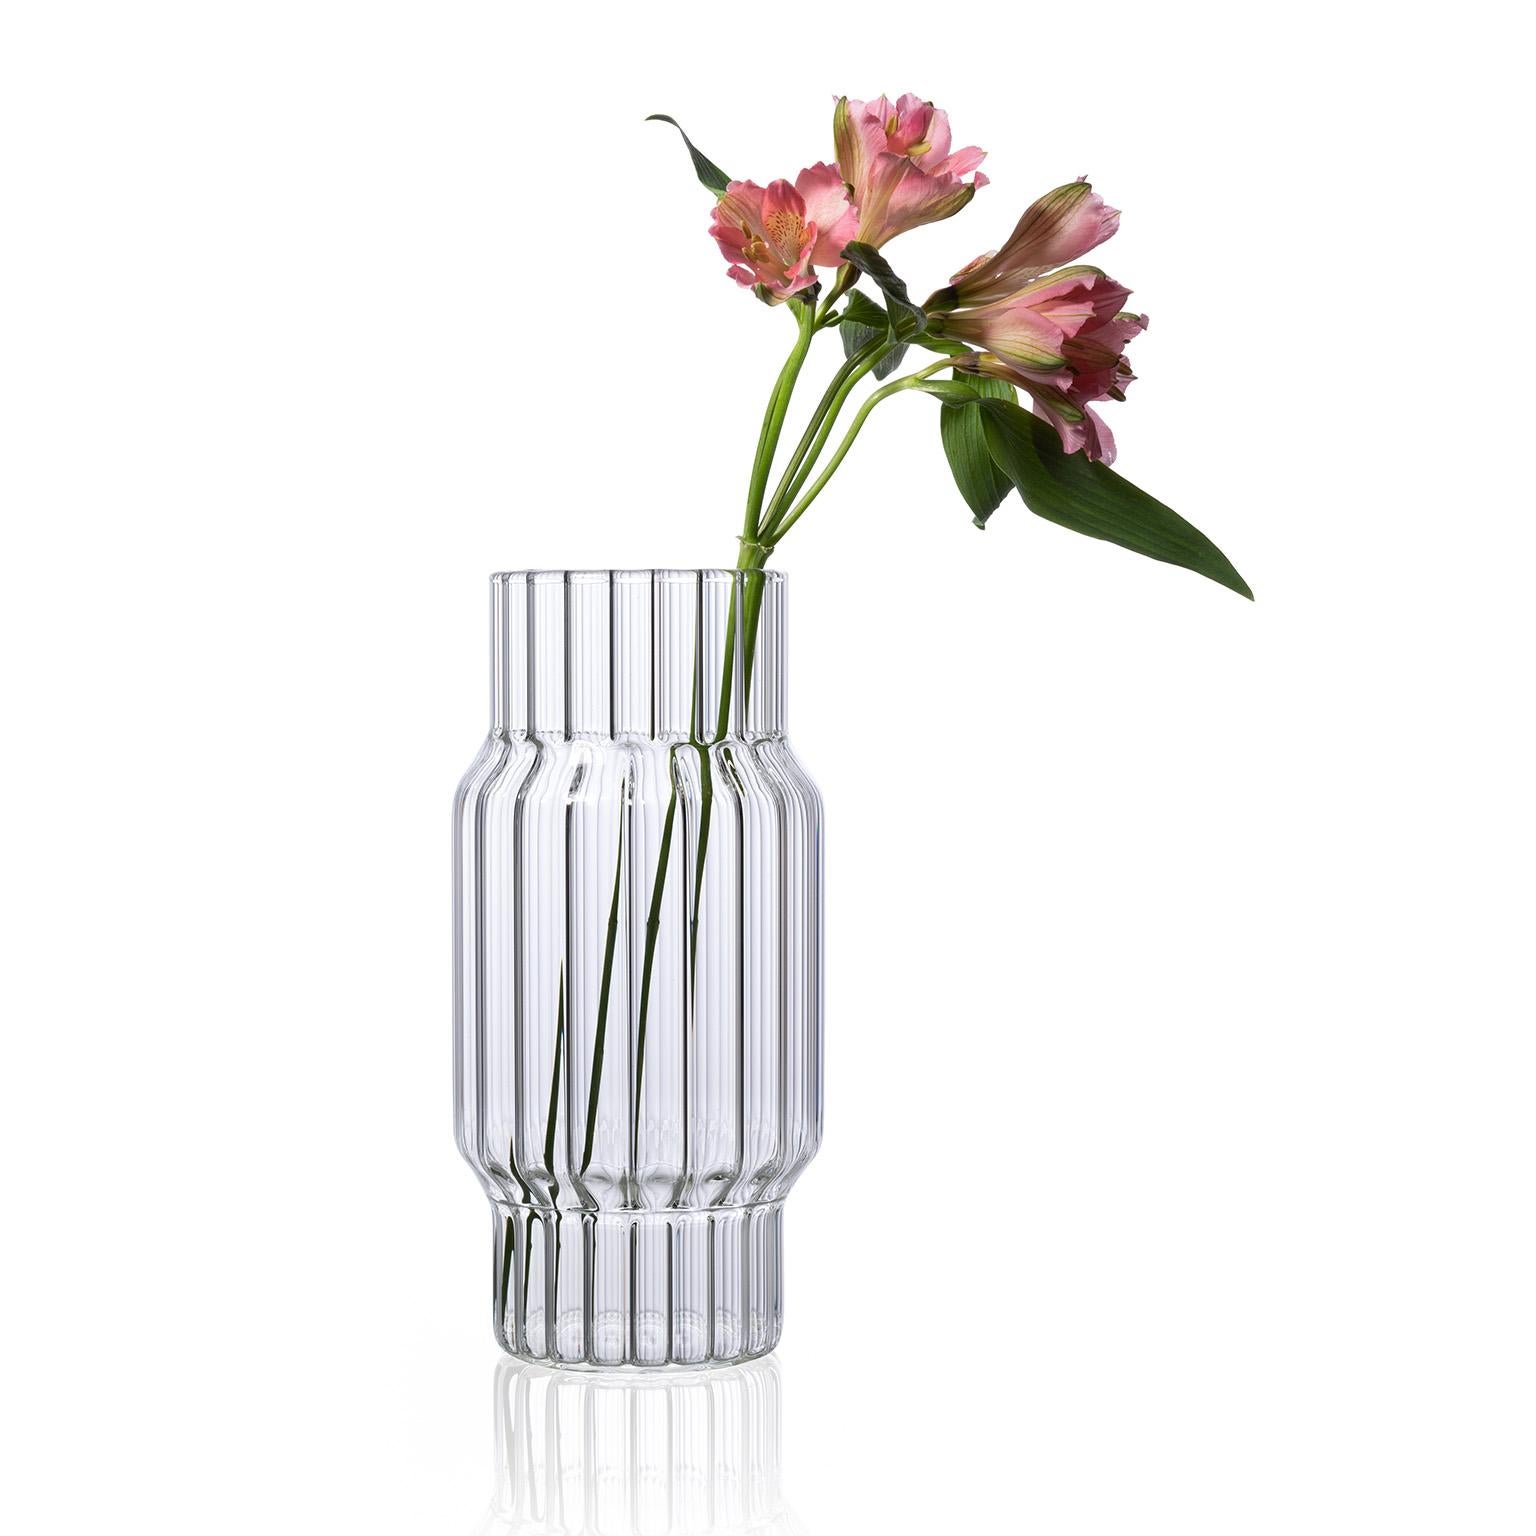 The Albany vase collection inverts tradition with the intricate fluting detail on the interior of the vase. The strong, simple lines of the vases make these perfect for any interior. Each one is handcrafted without the use of molds. Suits any modern